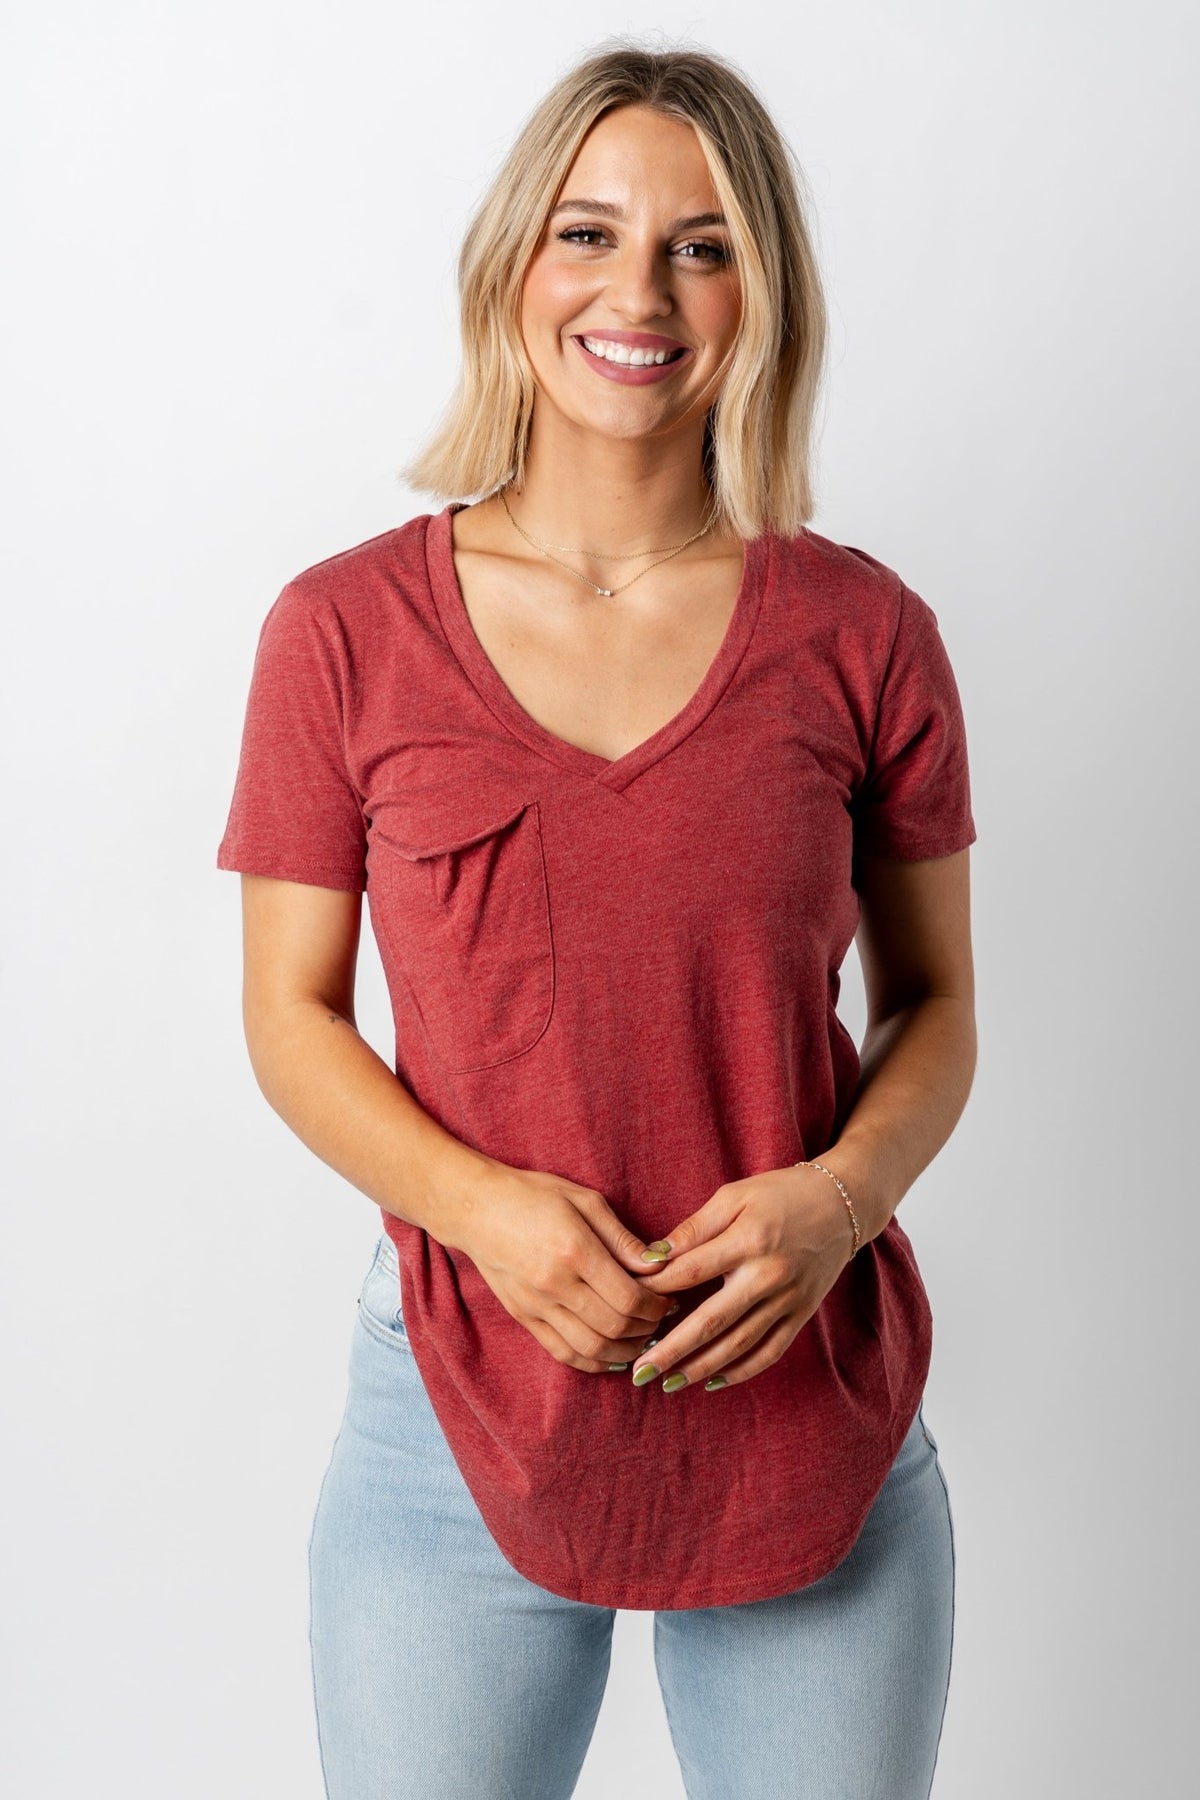 Z Supply pocket tee ruby - Z Supply Top - Z Supply Tops, Dresses, Tanks, Tees, Cardigans, Joggers and Loungewear at Lush Fashion Lounge